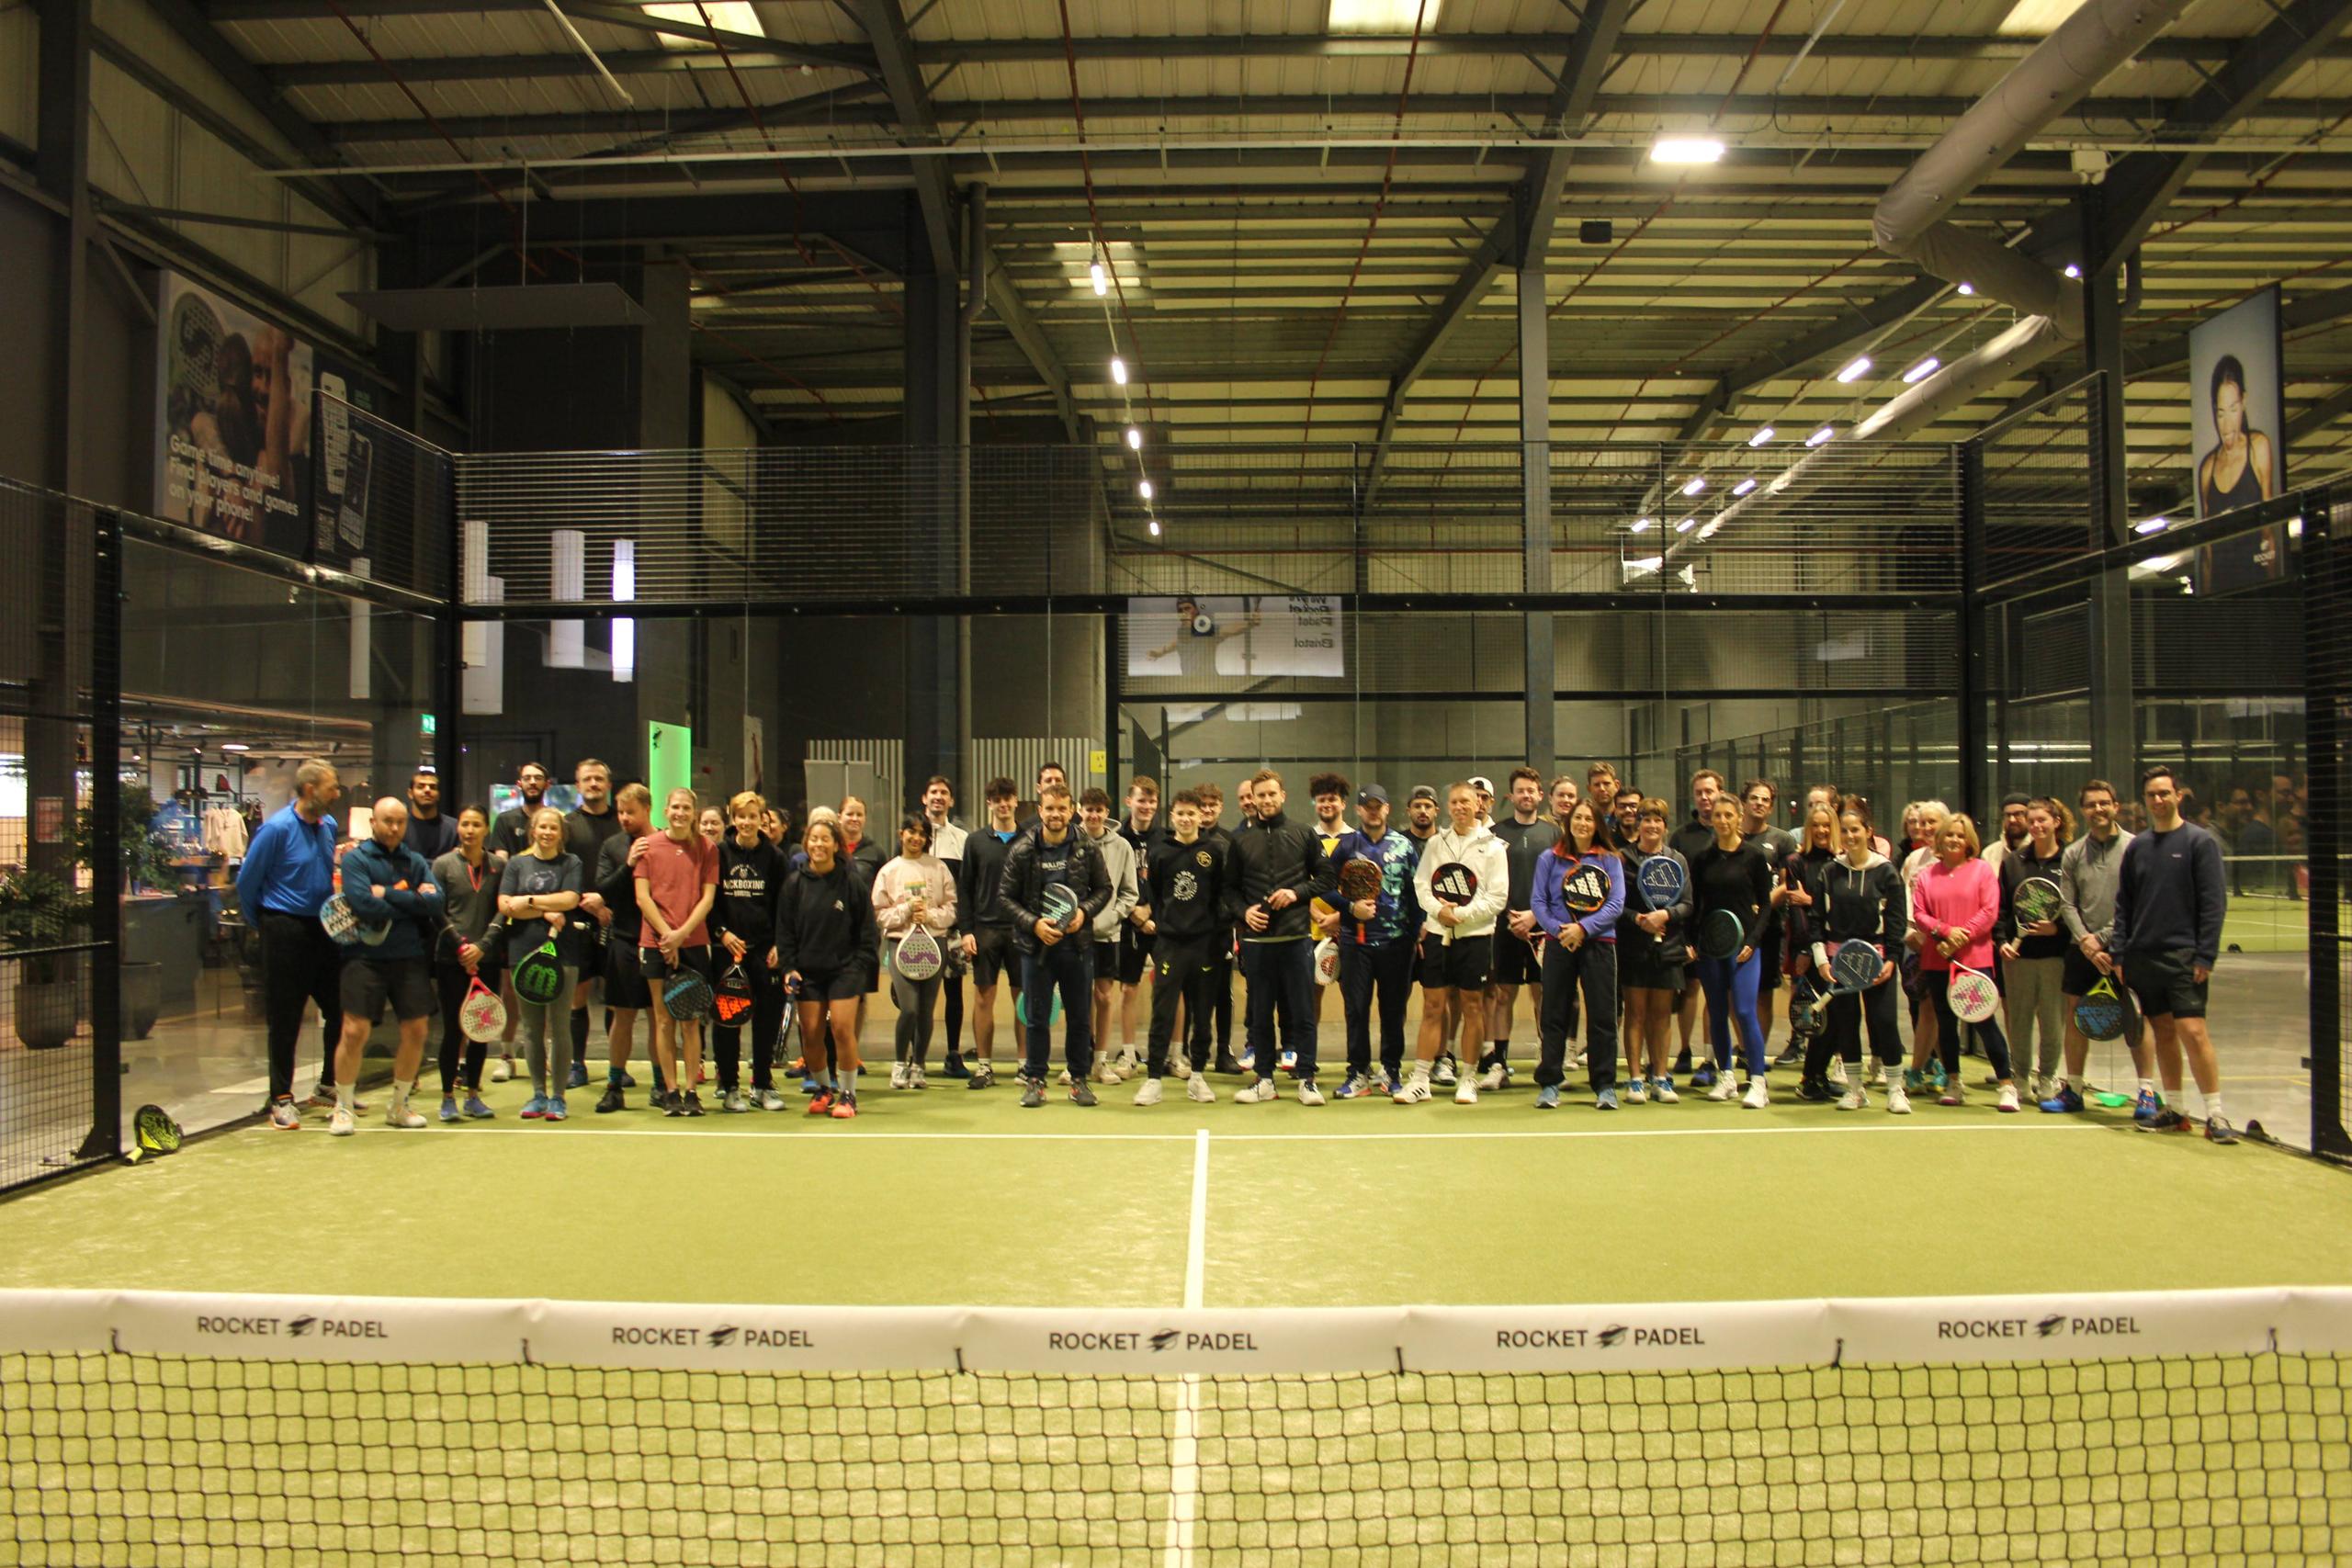 Why is padel so popular?